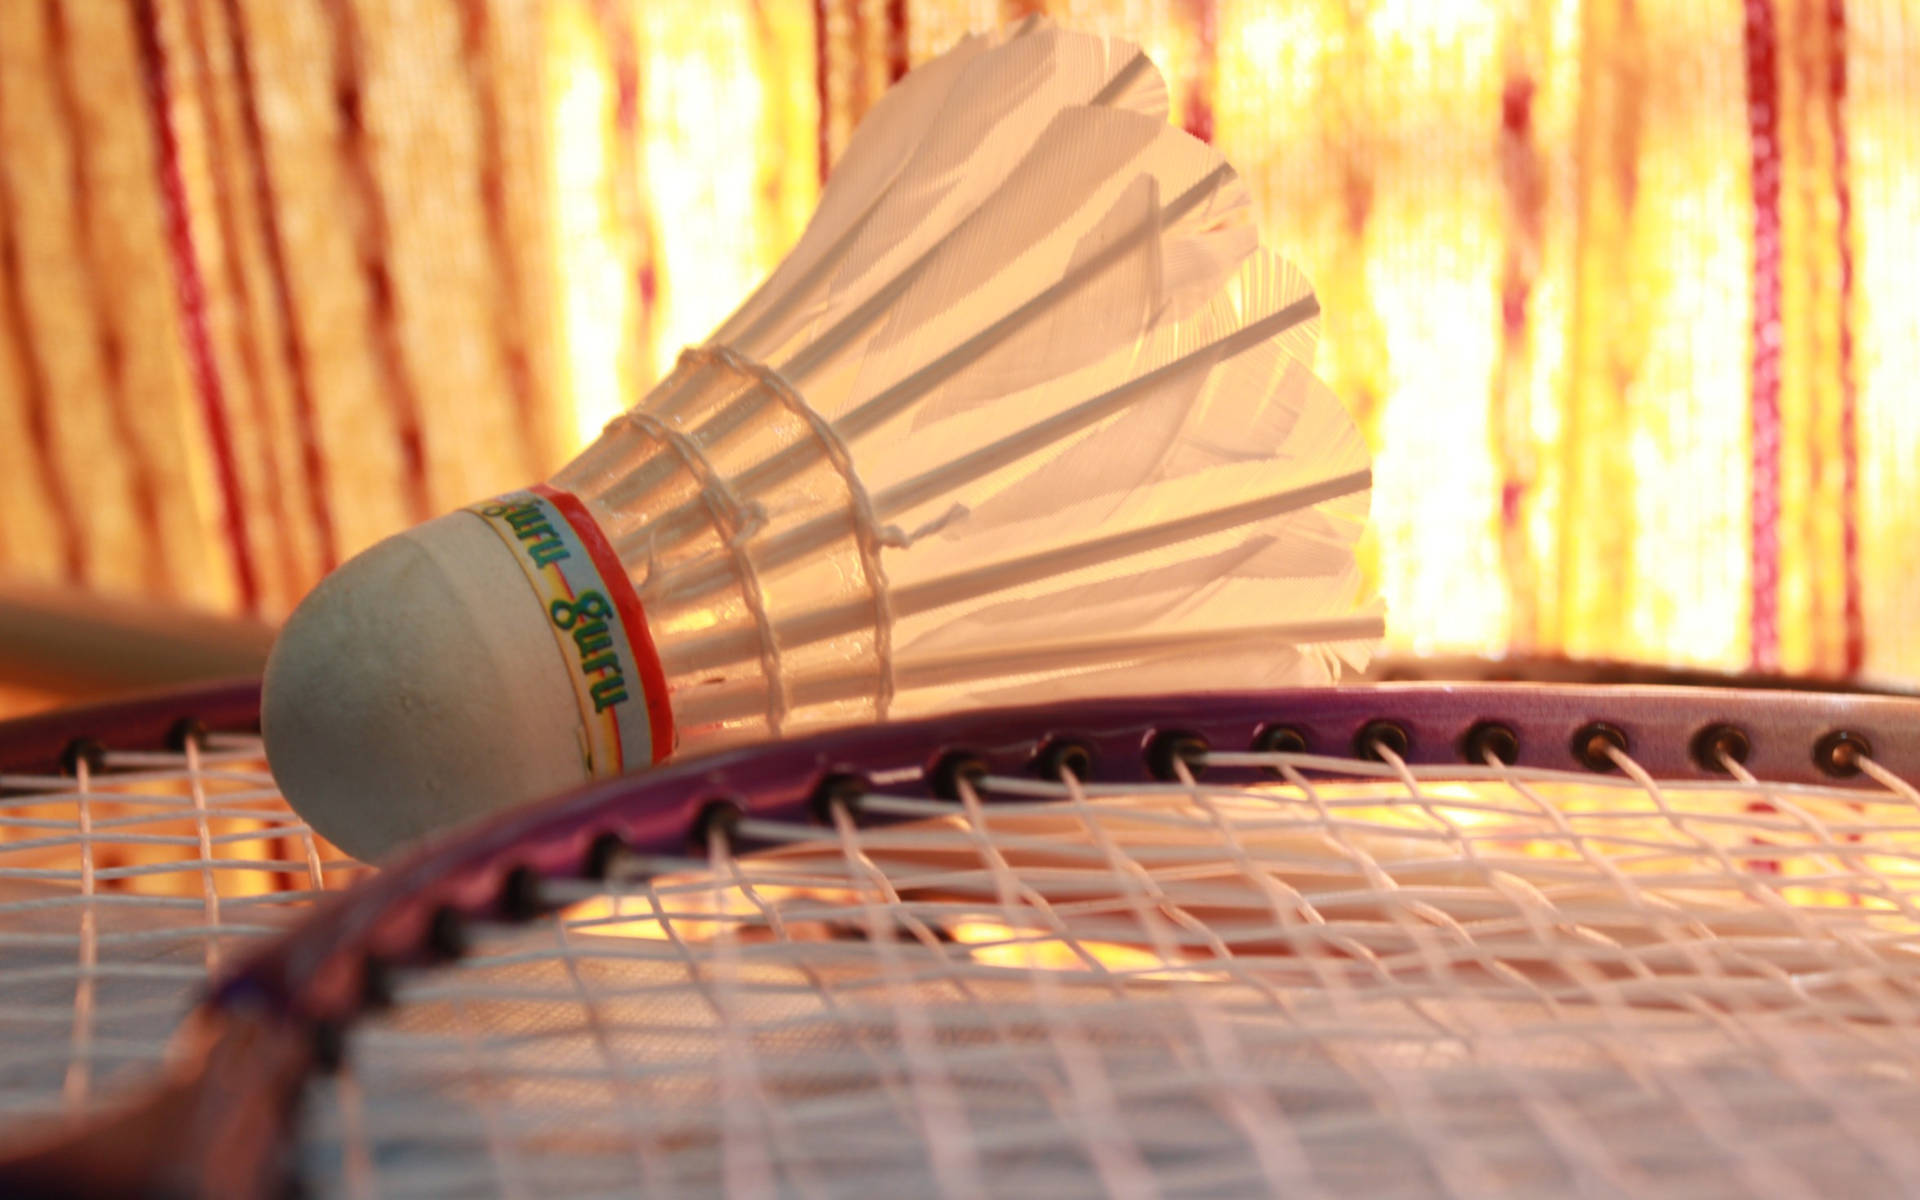 2880X1800 Badminton Wallpaper and Background